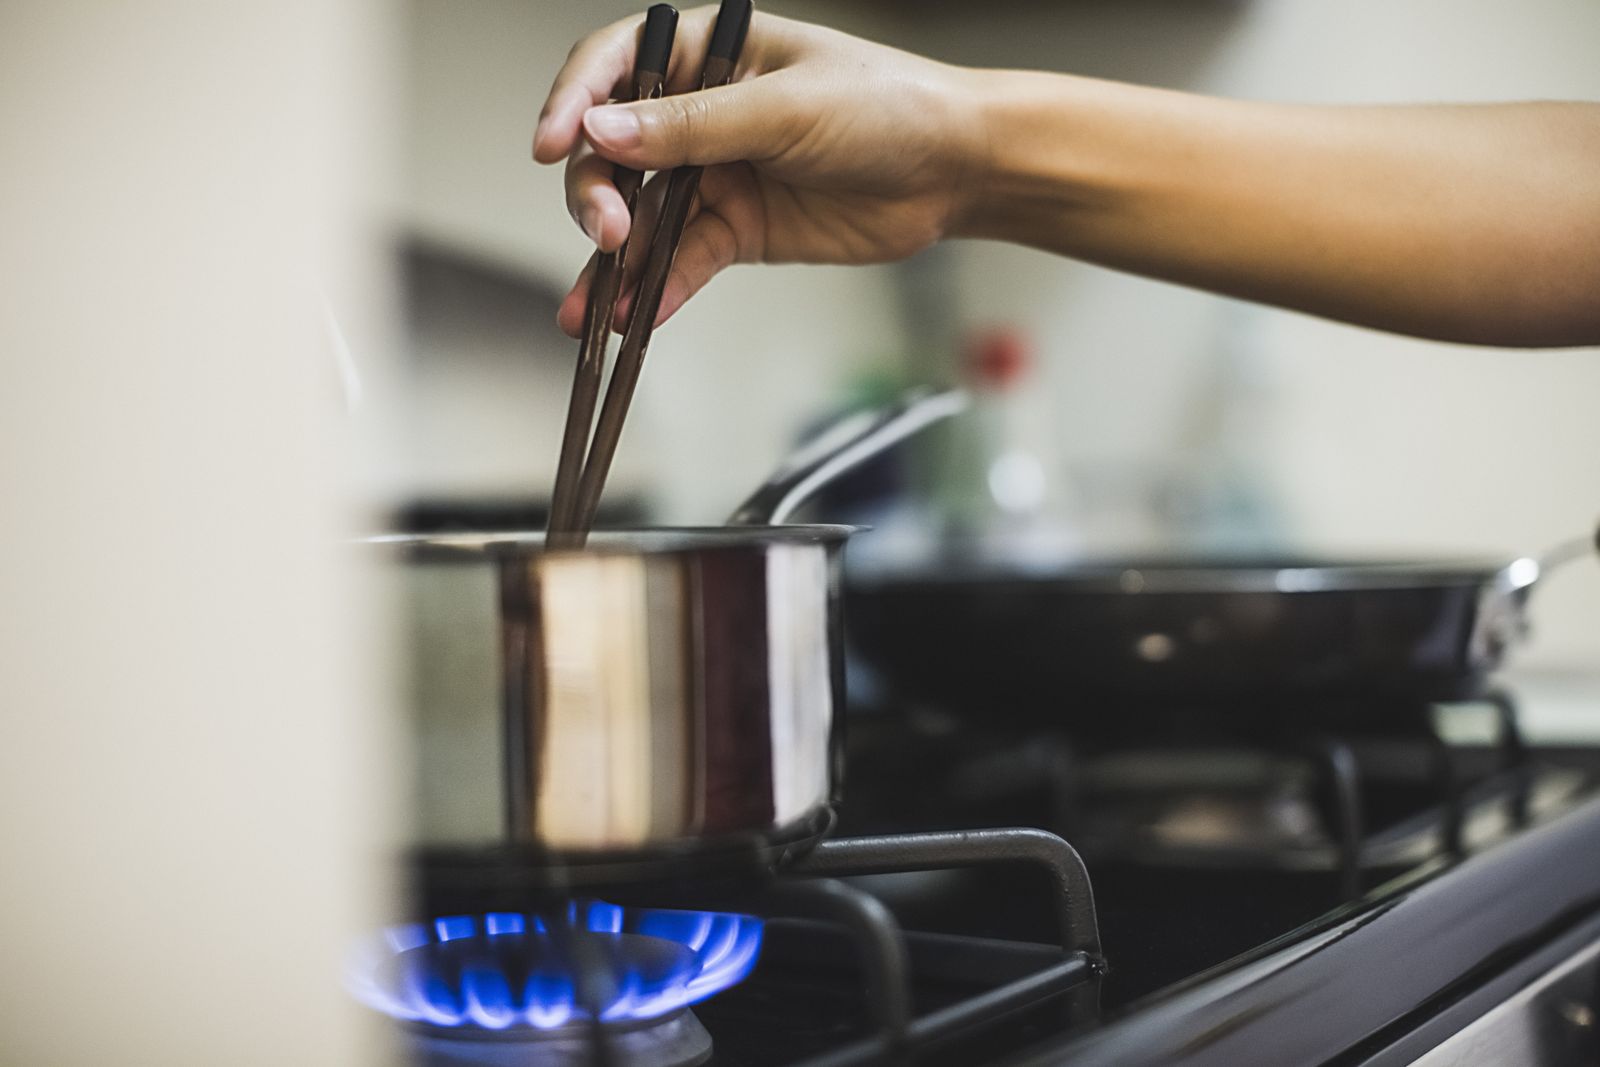 Gas stoves impact climate change and public health, study shows